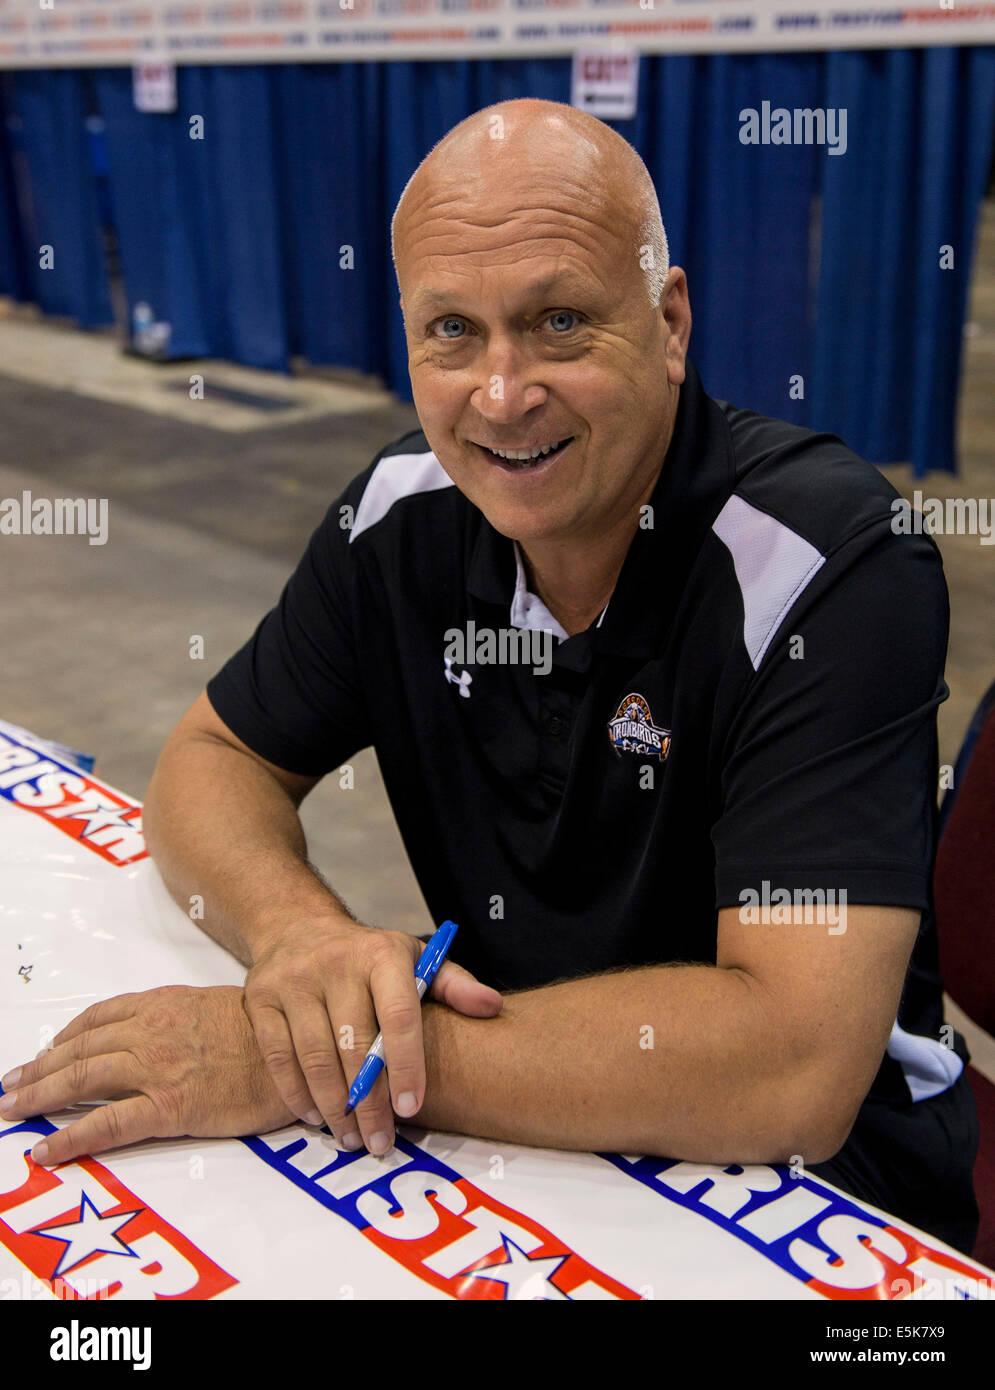 Cleveland, Ohio, USA. 02nd Aug, 2014. MLB Hall of Famer CAL RIPKEN, JR. signs autographs during the 35th National Sports Collectors Convention at the I-X Center. The five-day show, the largest of its kind in the country, is expected to draw more than 40,000 attendees. Among the offerings are in-person autograph signings from more than 100 sports celebrities, as well as sports cards, toys, game-used jerseys and a cornucopia of other collectible memorabilia. © Brian Cahn/ZUMA Wire/Alamy Live News Stock Photo